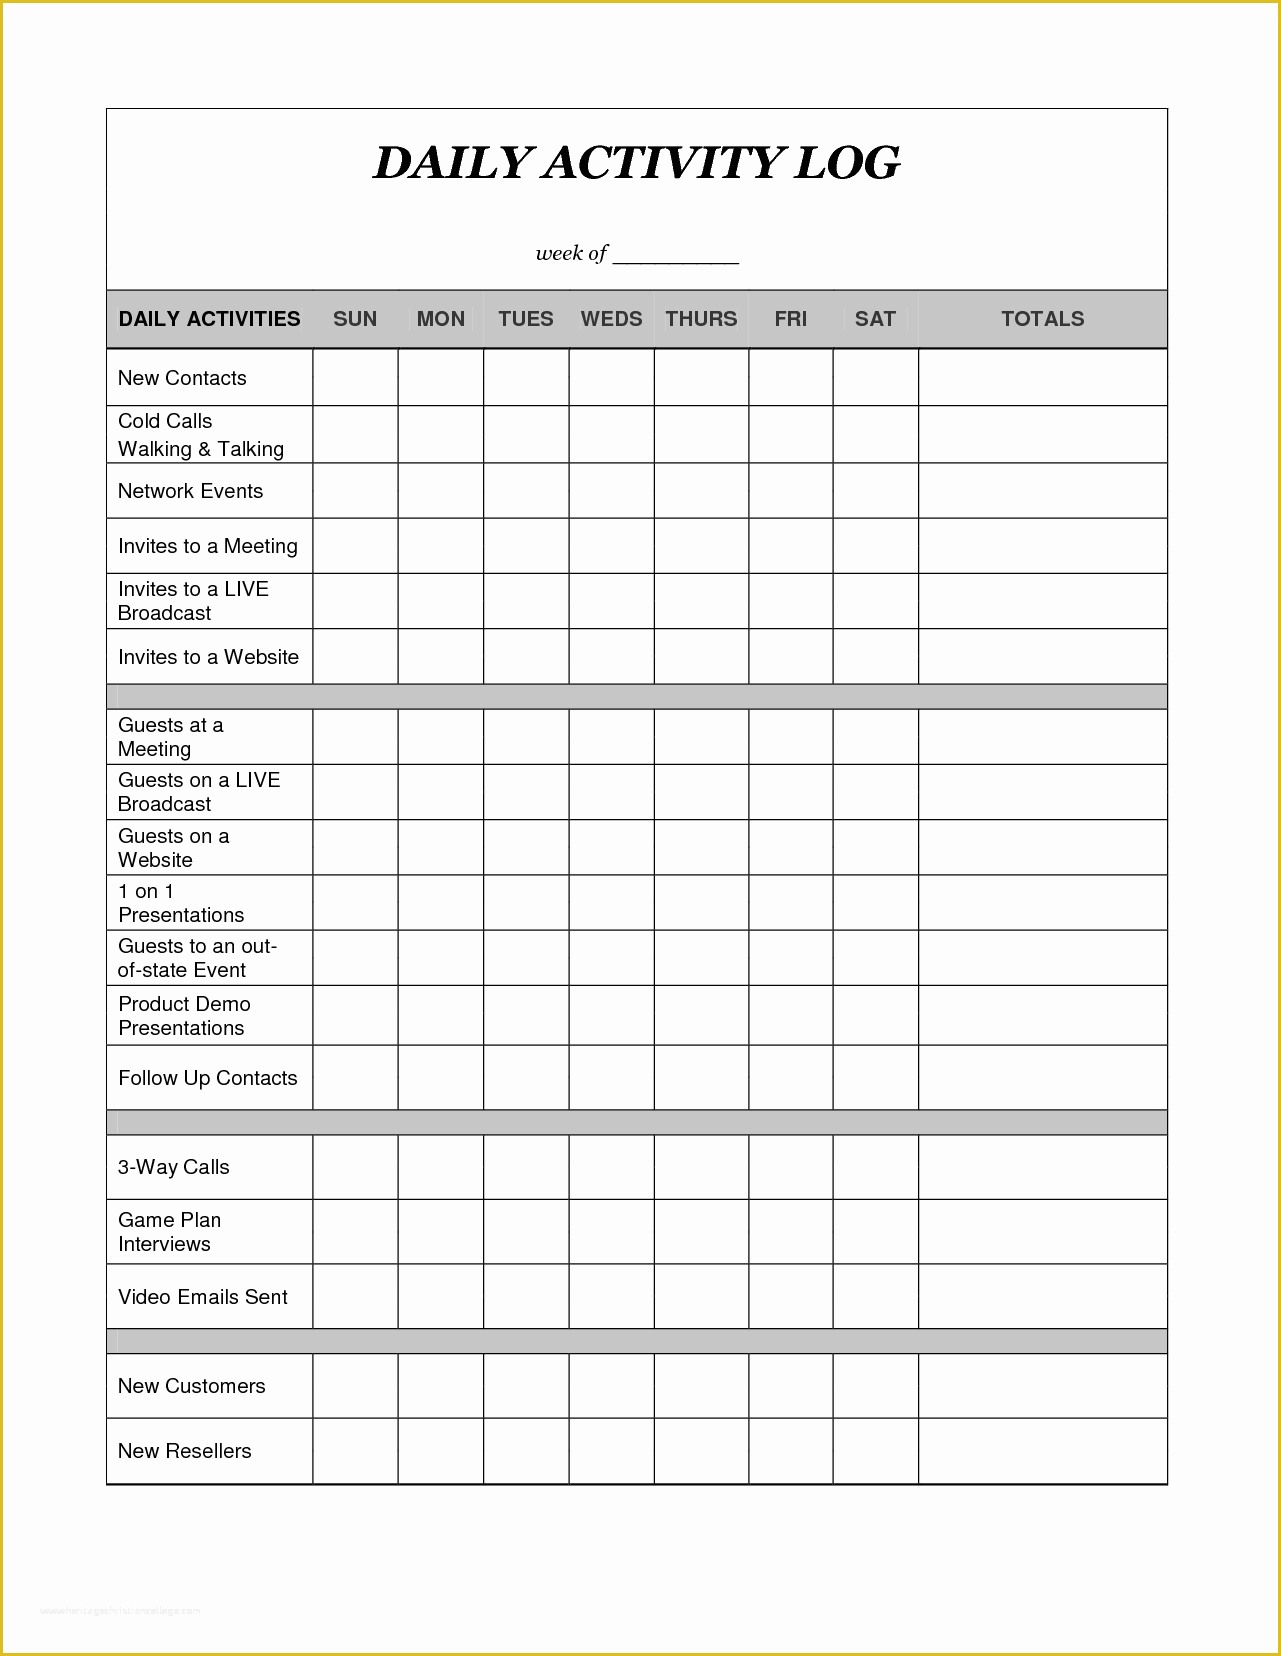 Activity Log Template Excel Free Download Of 8 Daily Activity Log Template